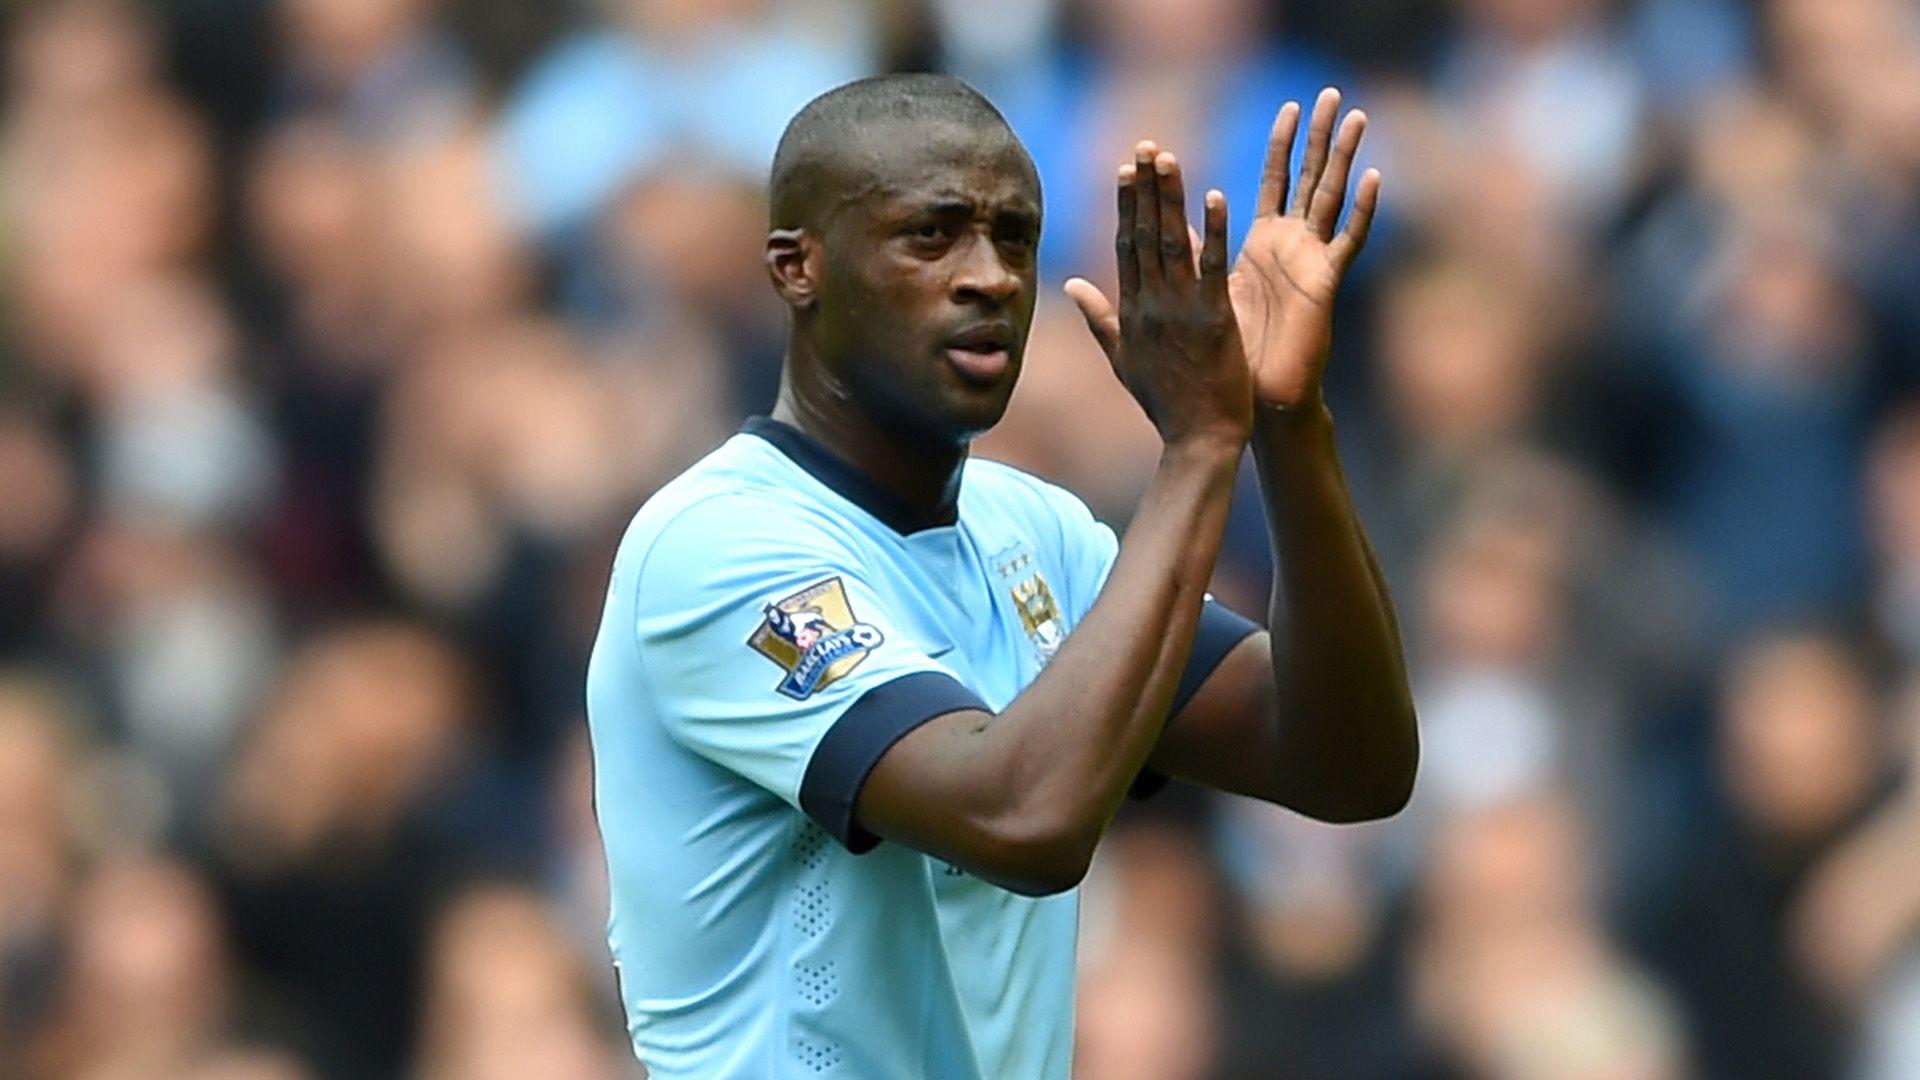 Manchester City manager Pep Guardiola will offer Yaya Toure new